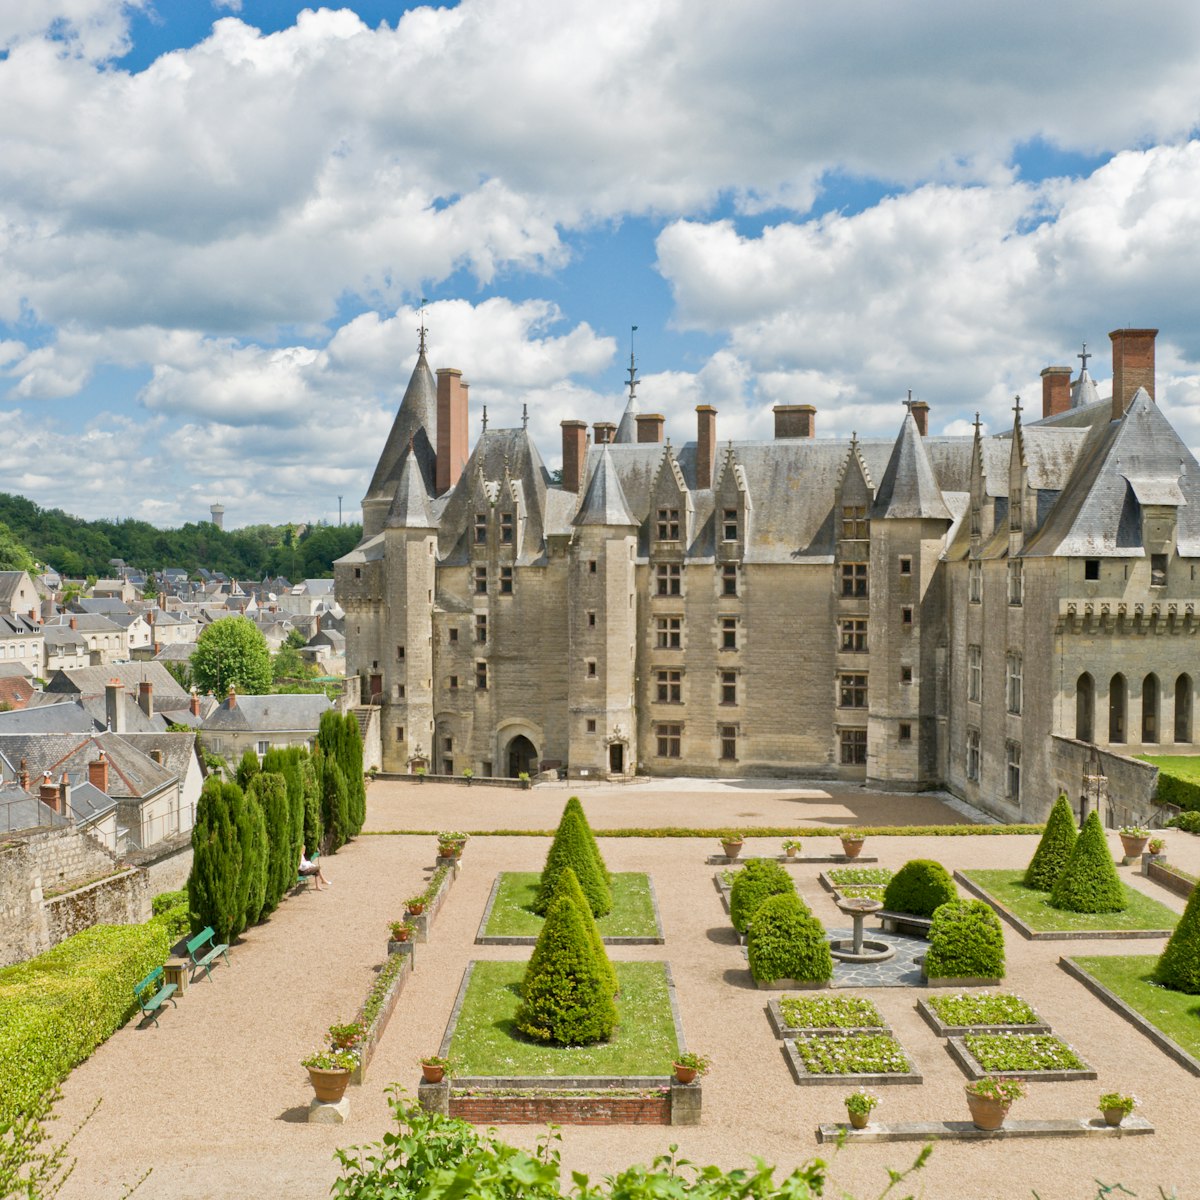 Panoramic view of the castle, garden and town Langeais, Loire Valley, France.